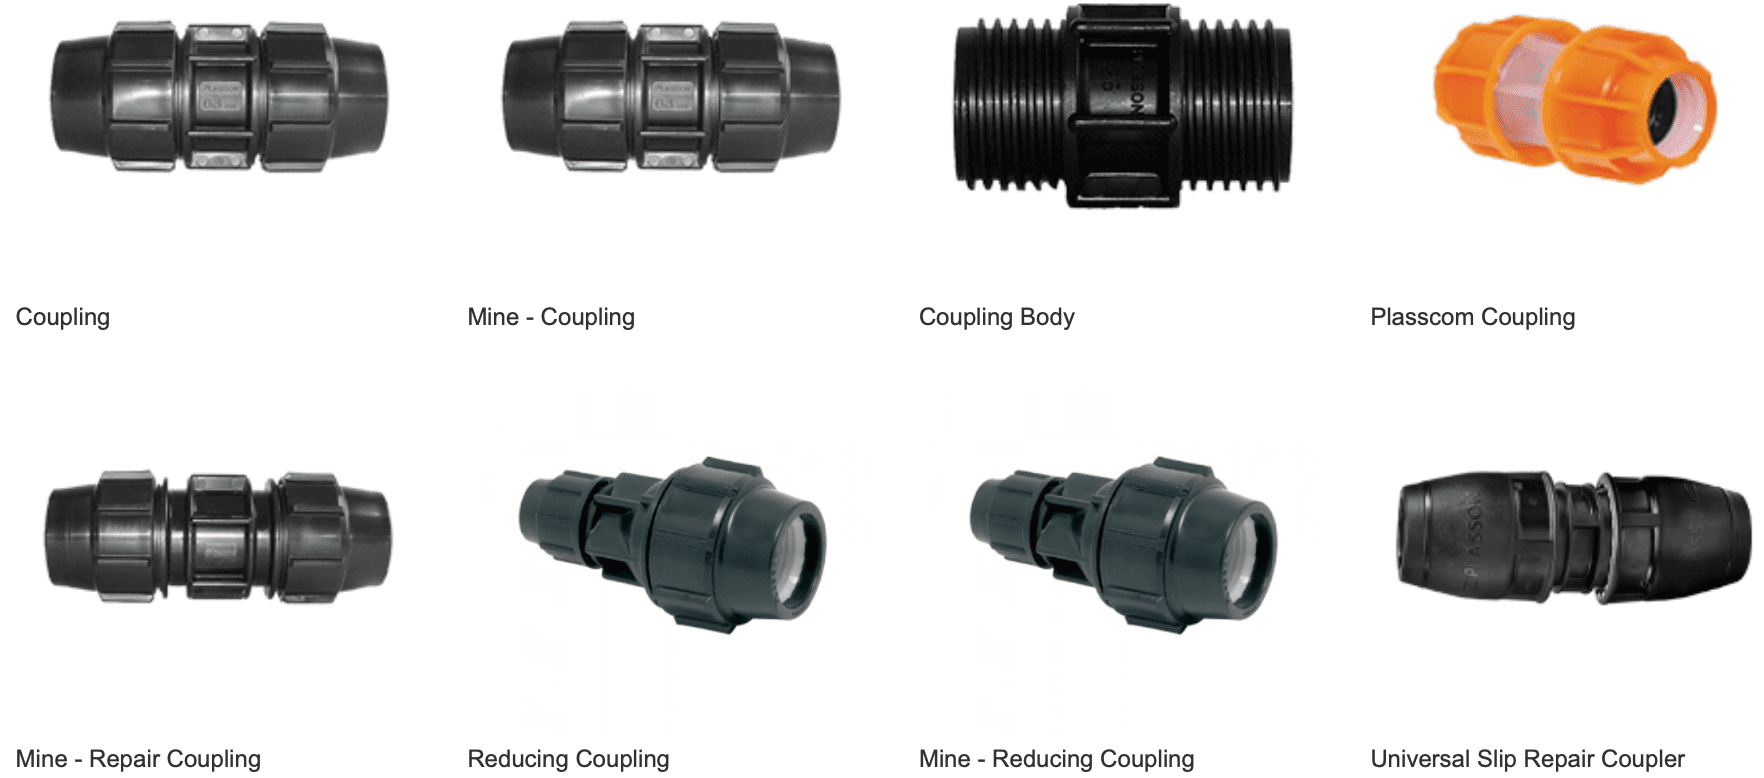 PLASSON OFFERS A RANGE OF METRIC COUPLING FITTINGS FOR PLUMBING